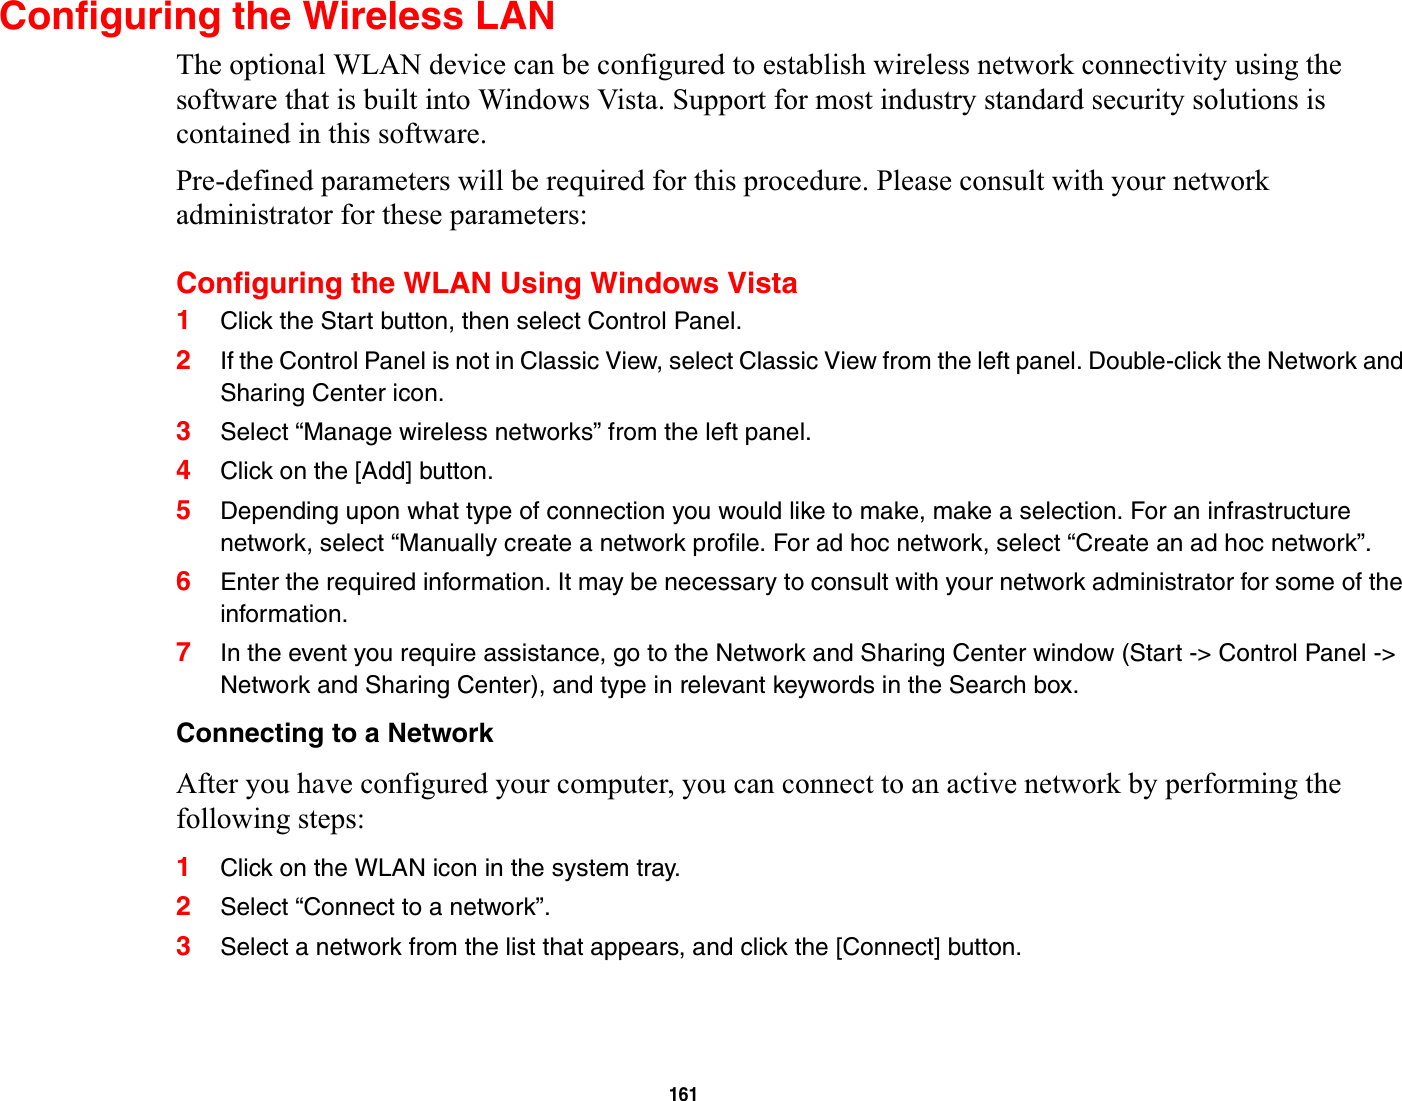 161Configuring the Wireless LANThe optional WLAN device can be configured to establish wireless network connectivity using the software that is built into Windows Vista. Support for most industry standard security solutions is contained in this software.Pre-defined parameters will be required for this procedure. Please consult with your network administrator for these parameters:Configuring the WLAN Using Windows Vista1Click the Start button, then select Control Panel.2If the Control Panel is not in Classic View, select Classic View from the left panel. Double-click the Network and Sharing Center icon.3Select “Manage wireless networks” from the left panel.4Click on the [Add] button.5Depending upon what type of connection you would like to make, make a selection. For an infrastructure network, select “Manually create a network profile. For ad hoc network, select “Create an ad hoc network”.6Enter the required information. It may be necessary to consult with your network administrator for some of the information.7In the event you require assistance, go to the Network and Sharing Center window (Start -&gt; Control Panel -&gt; Network and Sharing Center), and type in relevant keywords in the Search box. Connecting to a NetworkAfter you have configured your computer, you can connect to an active network by performing the following steps:1Click on the WLAN icon in the system tray.2Select “Connect to a network”.3Select a network from the list that appears, and click the [Connect] button.